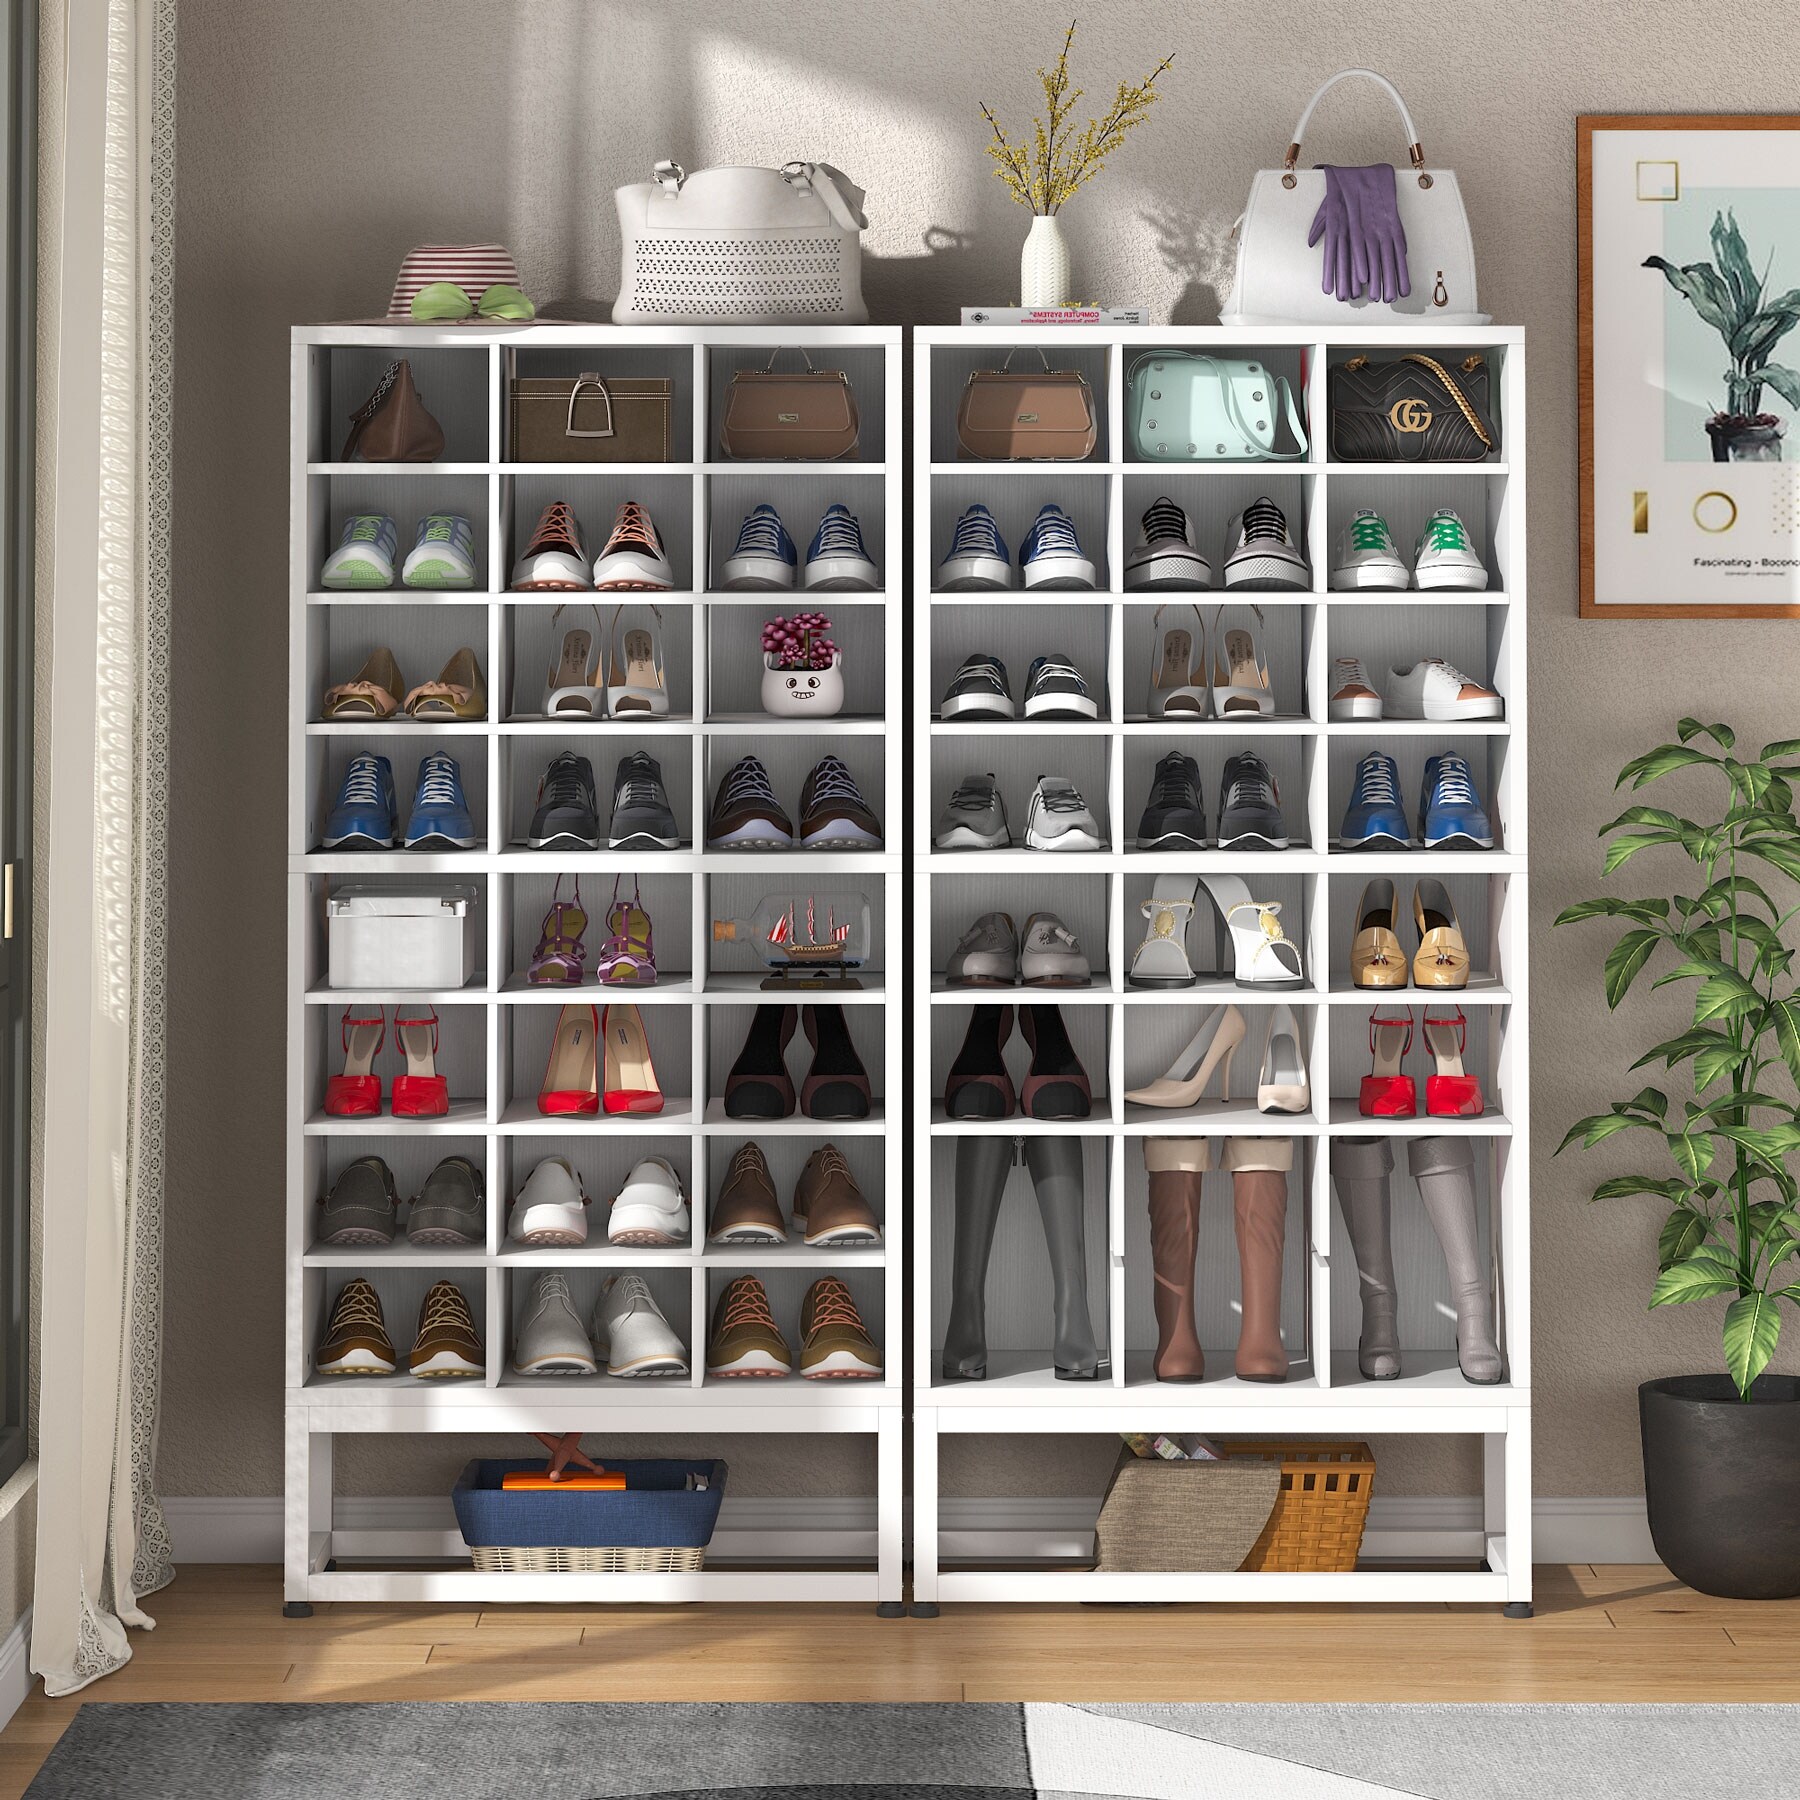 https://ak1.ostkcdn.com/images/products/is/images/direct/9ac27c890fc1c89c941f41d1f8d628b37de5e29a/24-Pair-Shoe-Storage-Cabinet-Adjustable-Shoe-Rack-Organizers%2C-8-Tier-White-Cube-Storage-Bookcase.jpg